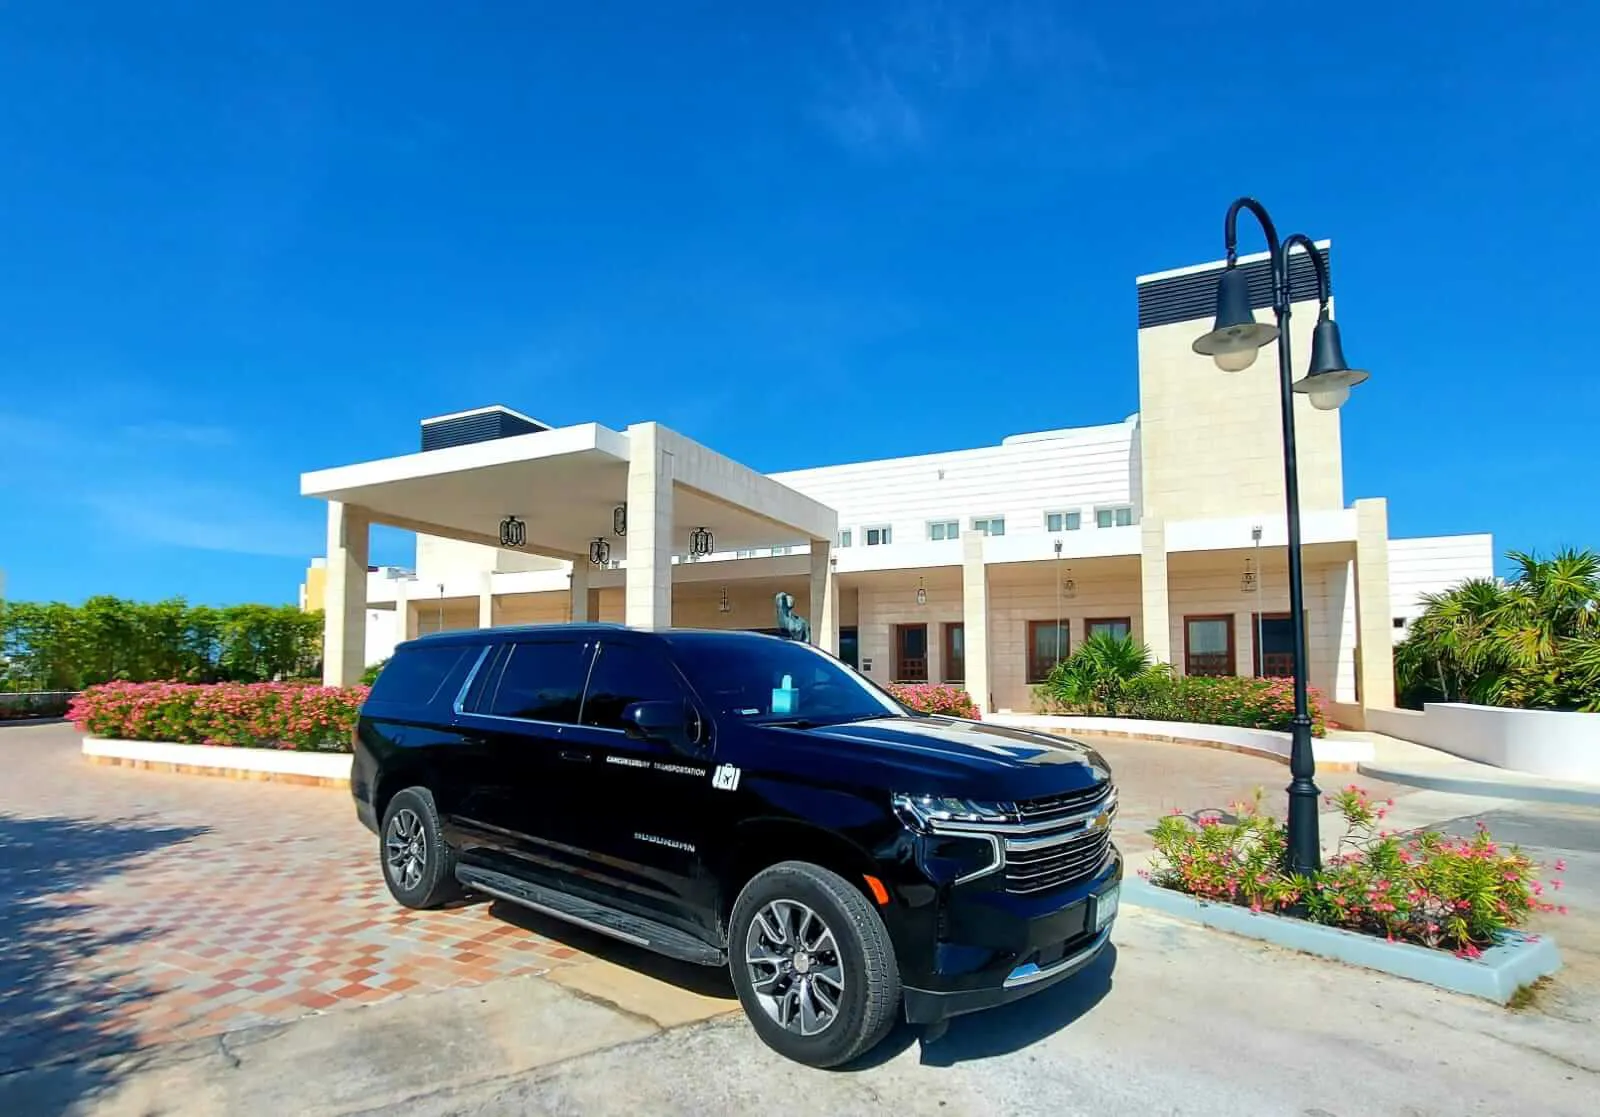 Luxury Suburban 2021 parked in front of hotel lobby